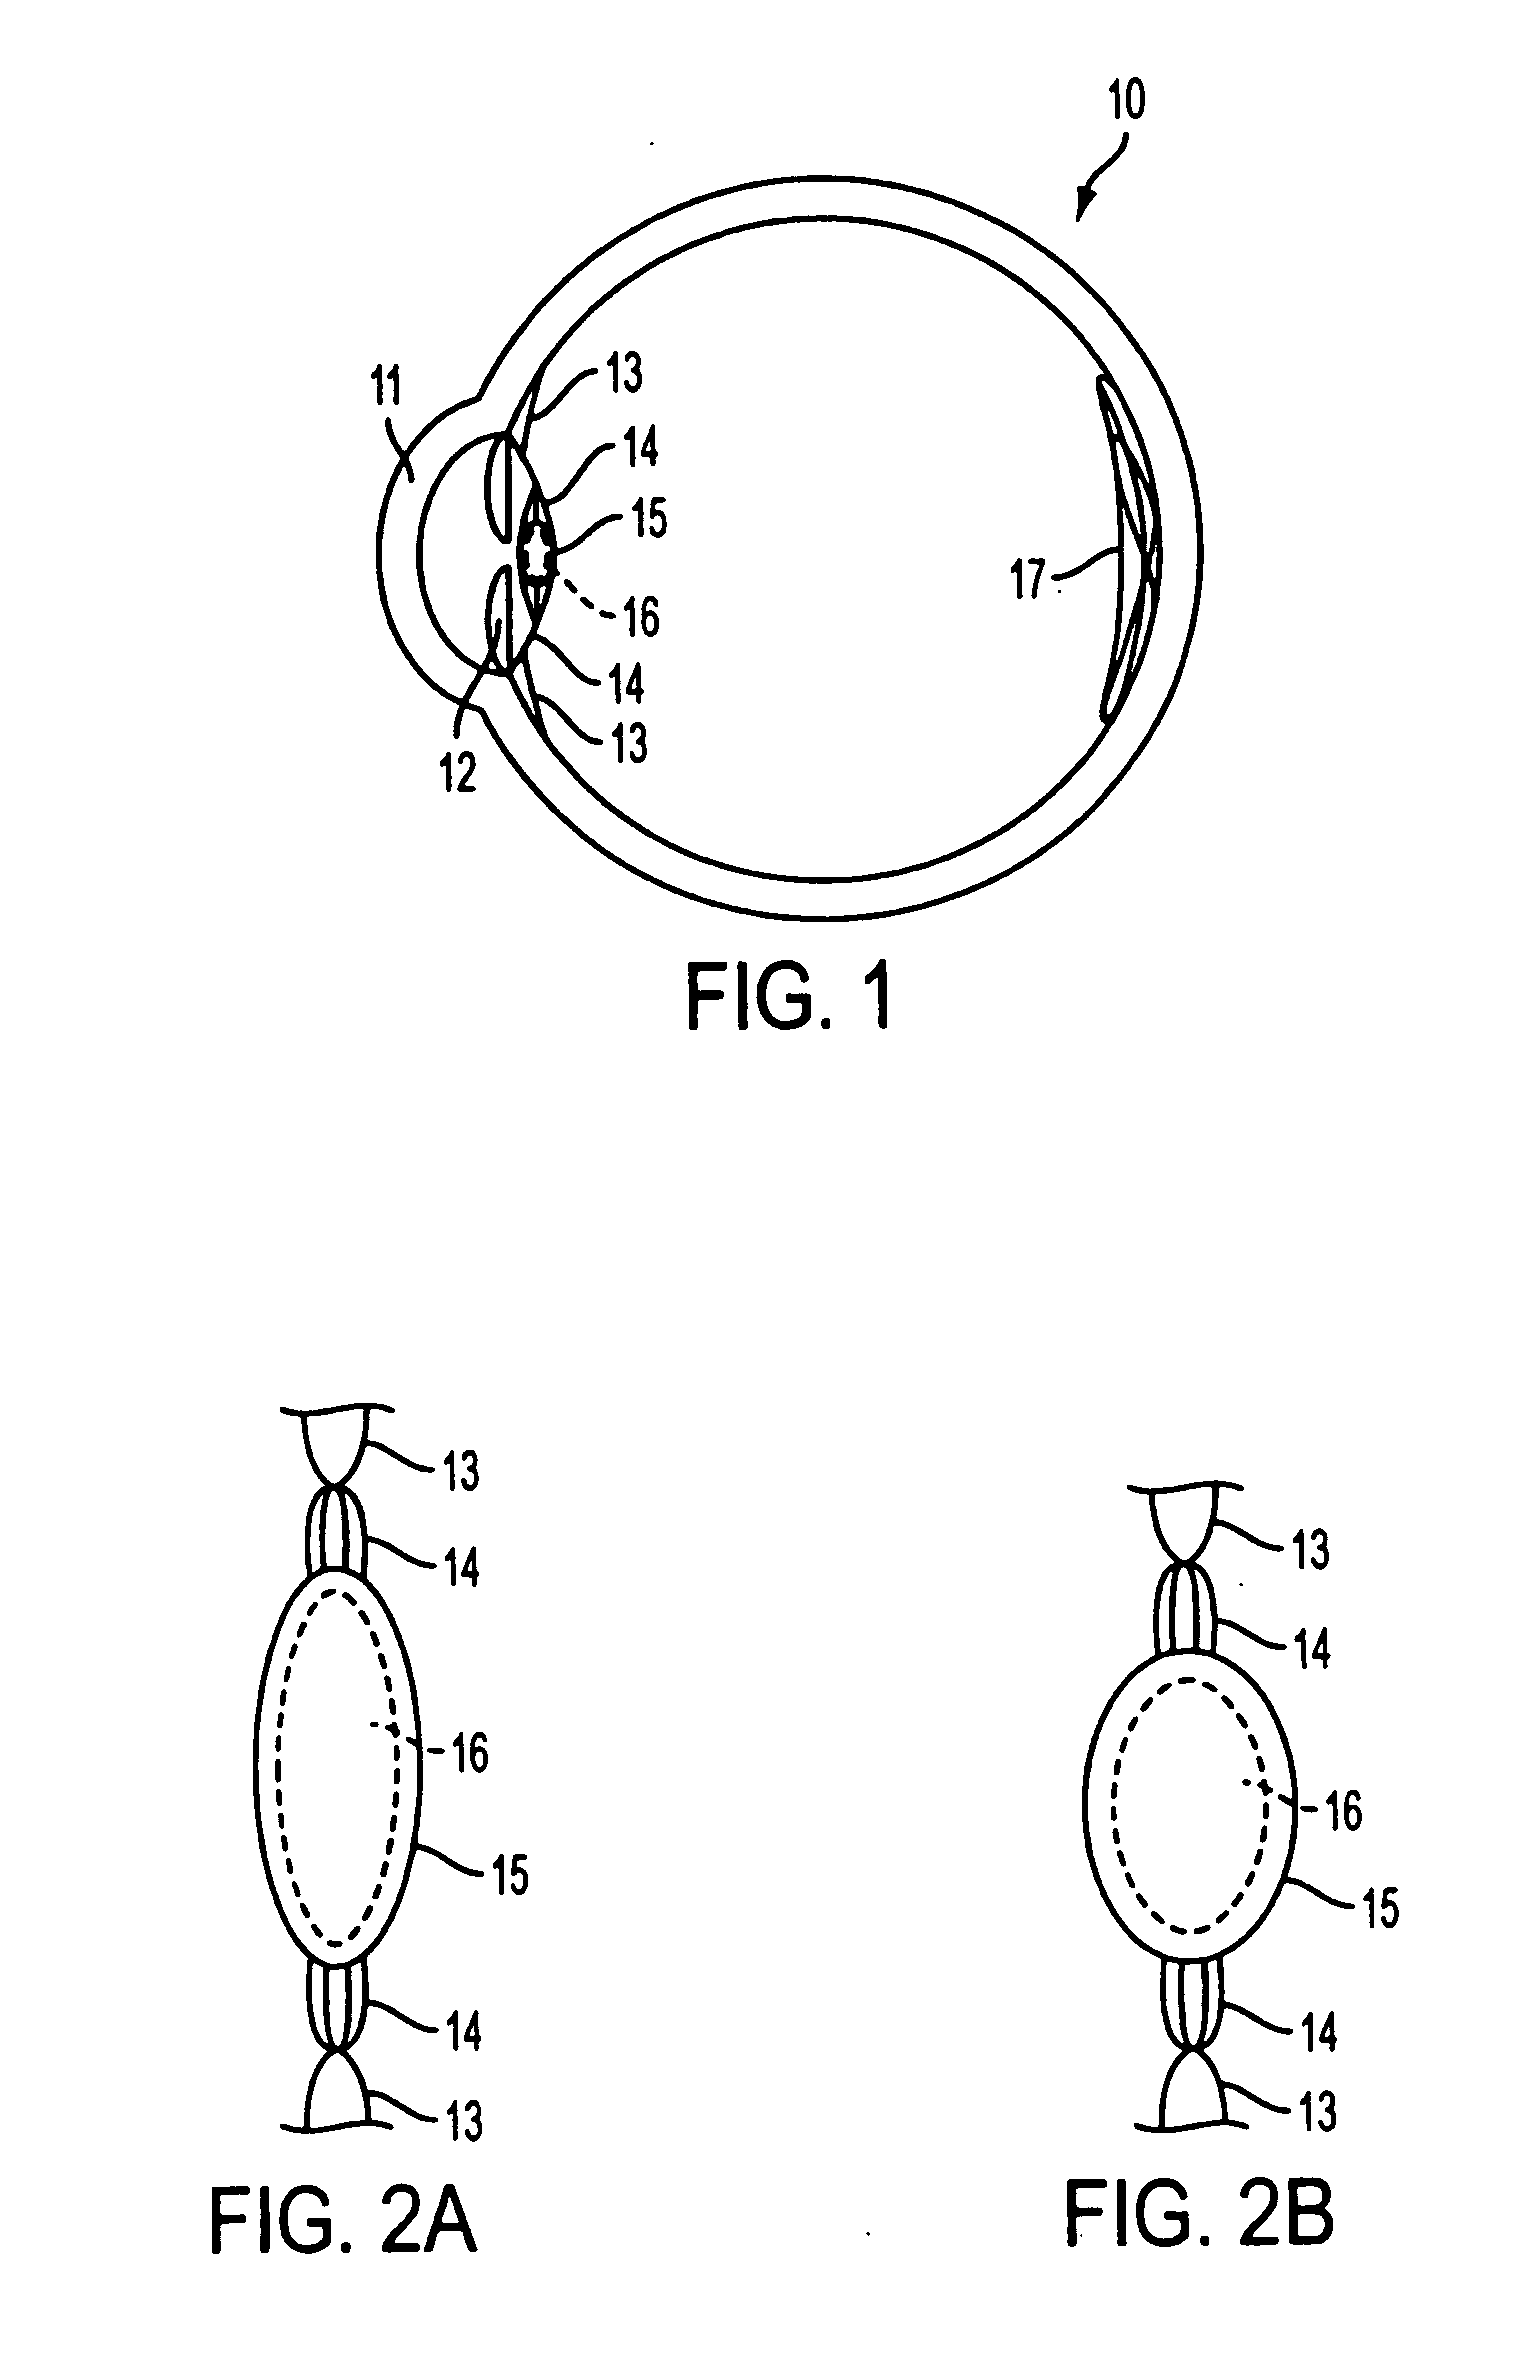 Methods of adjusting the power of an intraocular lens